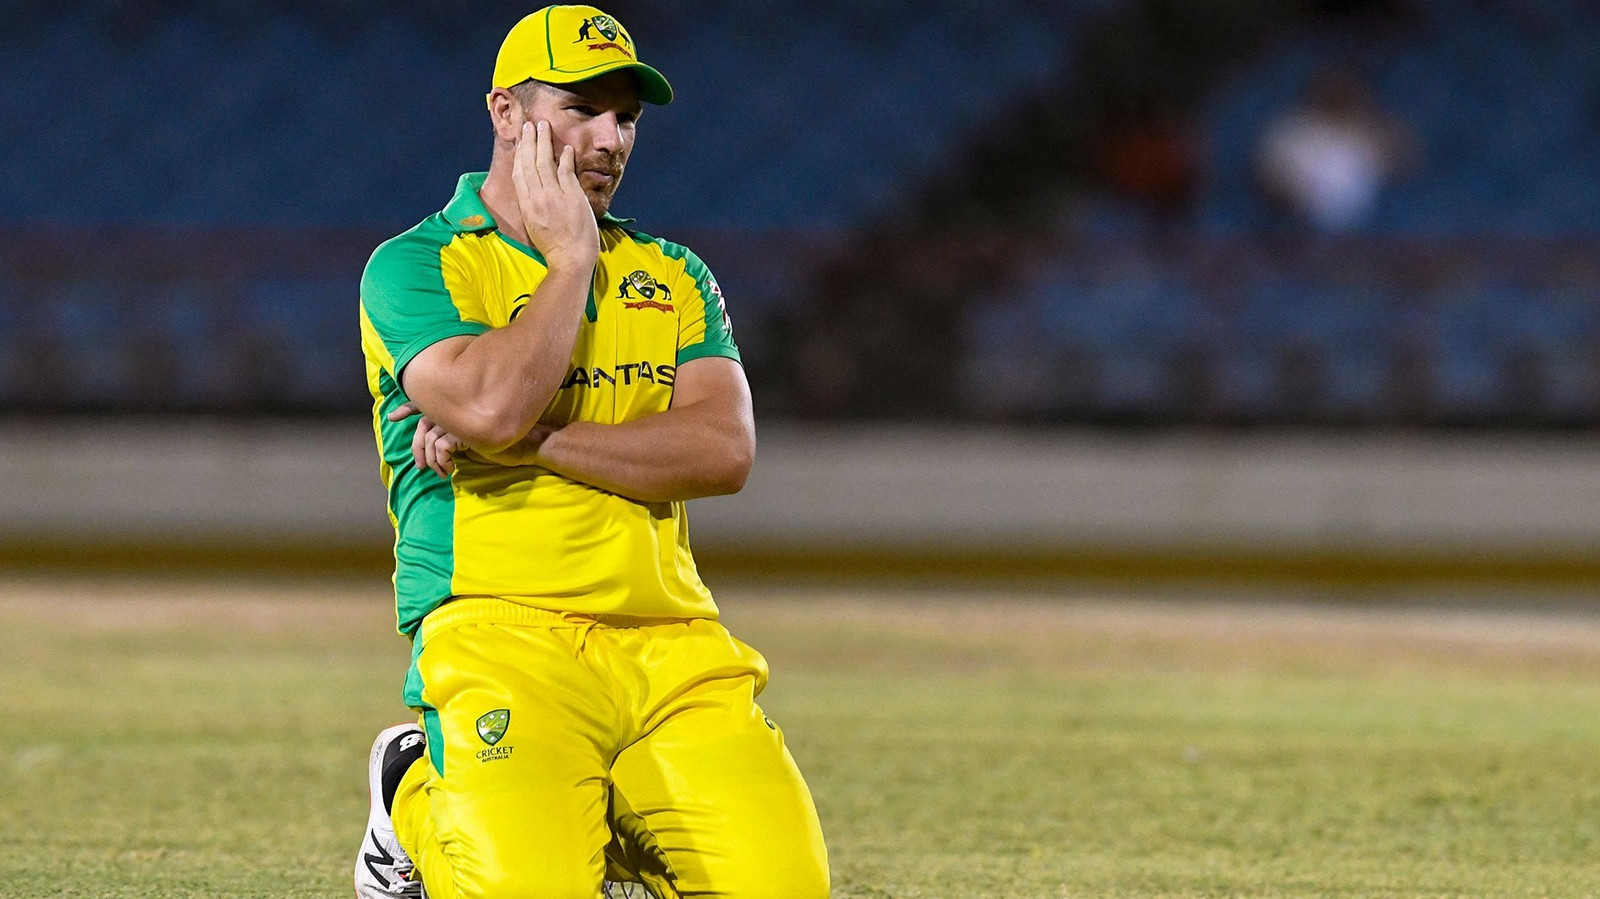 Australia skipper Aaron Finch ruled out of Bangladesh tour due to a knee injury